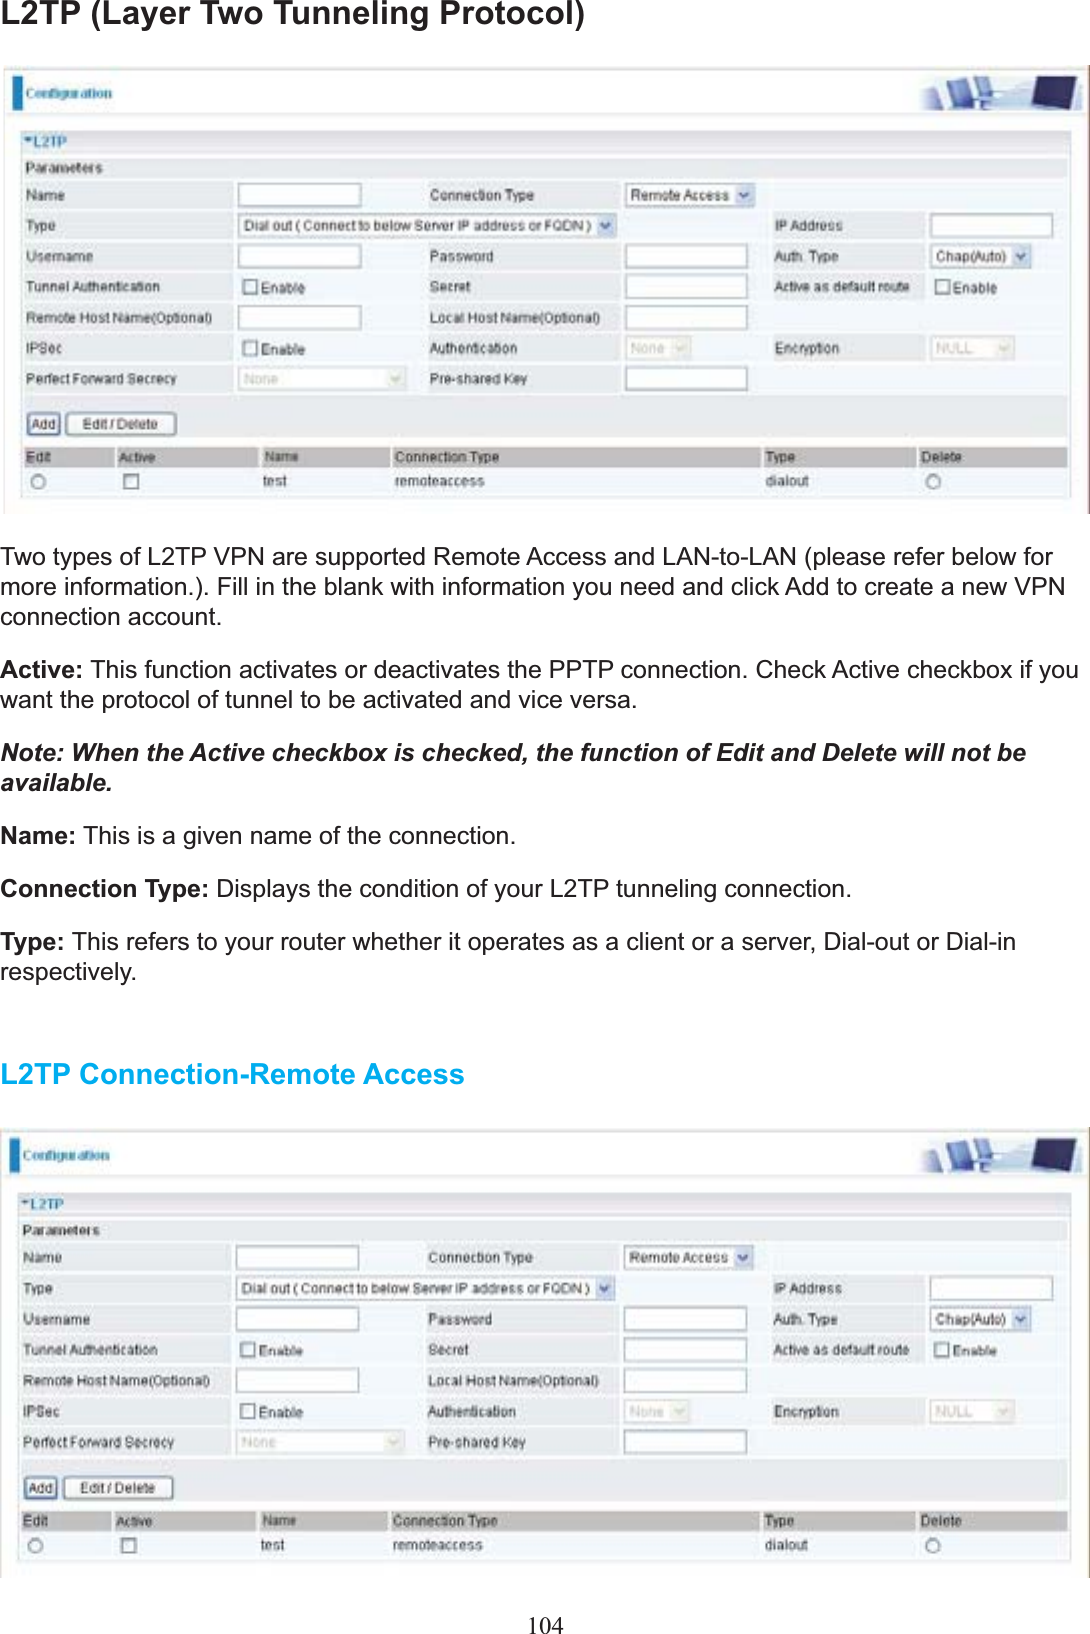 L2TP (Layer Two Tunneling Protocol)Two types of L2TP VPN are supported Remote Access and LAN-to-LAN (please refer below for more information.). Fill in the blank with information you need and click Add to create a new VPN connection account.Active: This function activates or deactivates the PPTP connection. Check Active checkbox if you want the protocol of tunnel to be activated and vice versa.Note: When the Active checkbox is checked, the function of Edit and Delete will not be available.Name: This is a given name of the connection.Connection Type: Displays the condition of your L2TP tunneling connection.Type: This refers to your router whether it operates as a client or a server, Dial-out or Dial-in respectively. L2TP Connection-Remote Access104